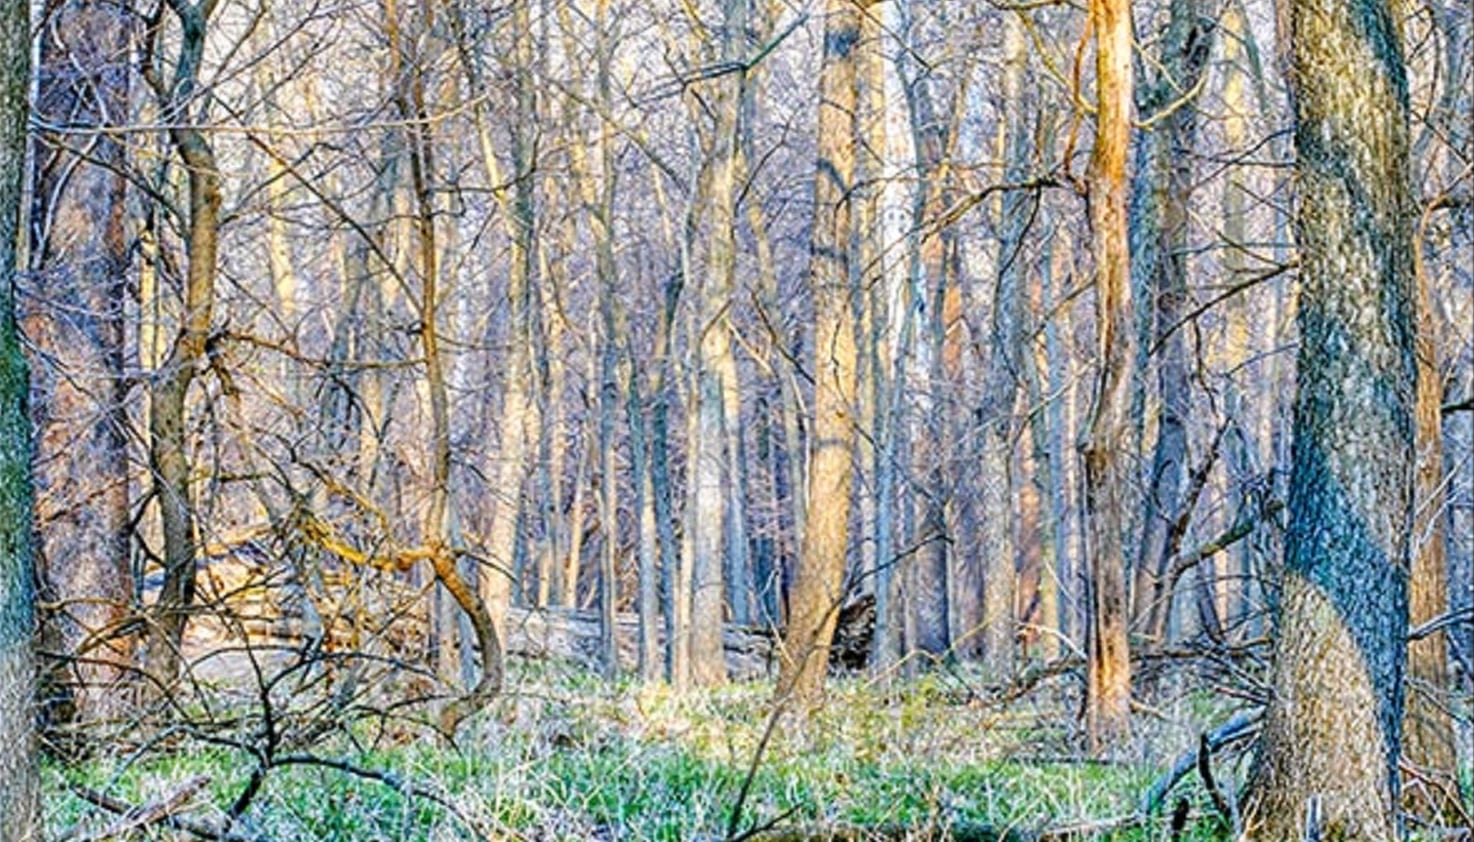 Woods in early spring, photo credit: Pat Mingarelli